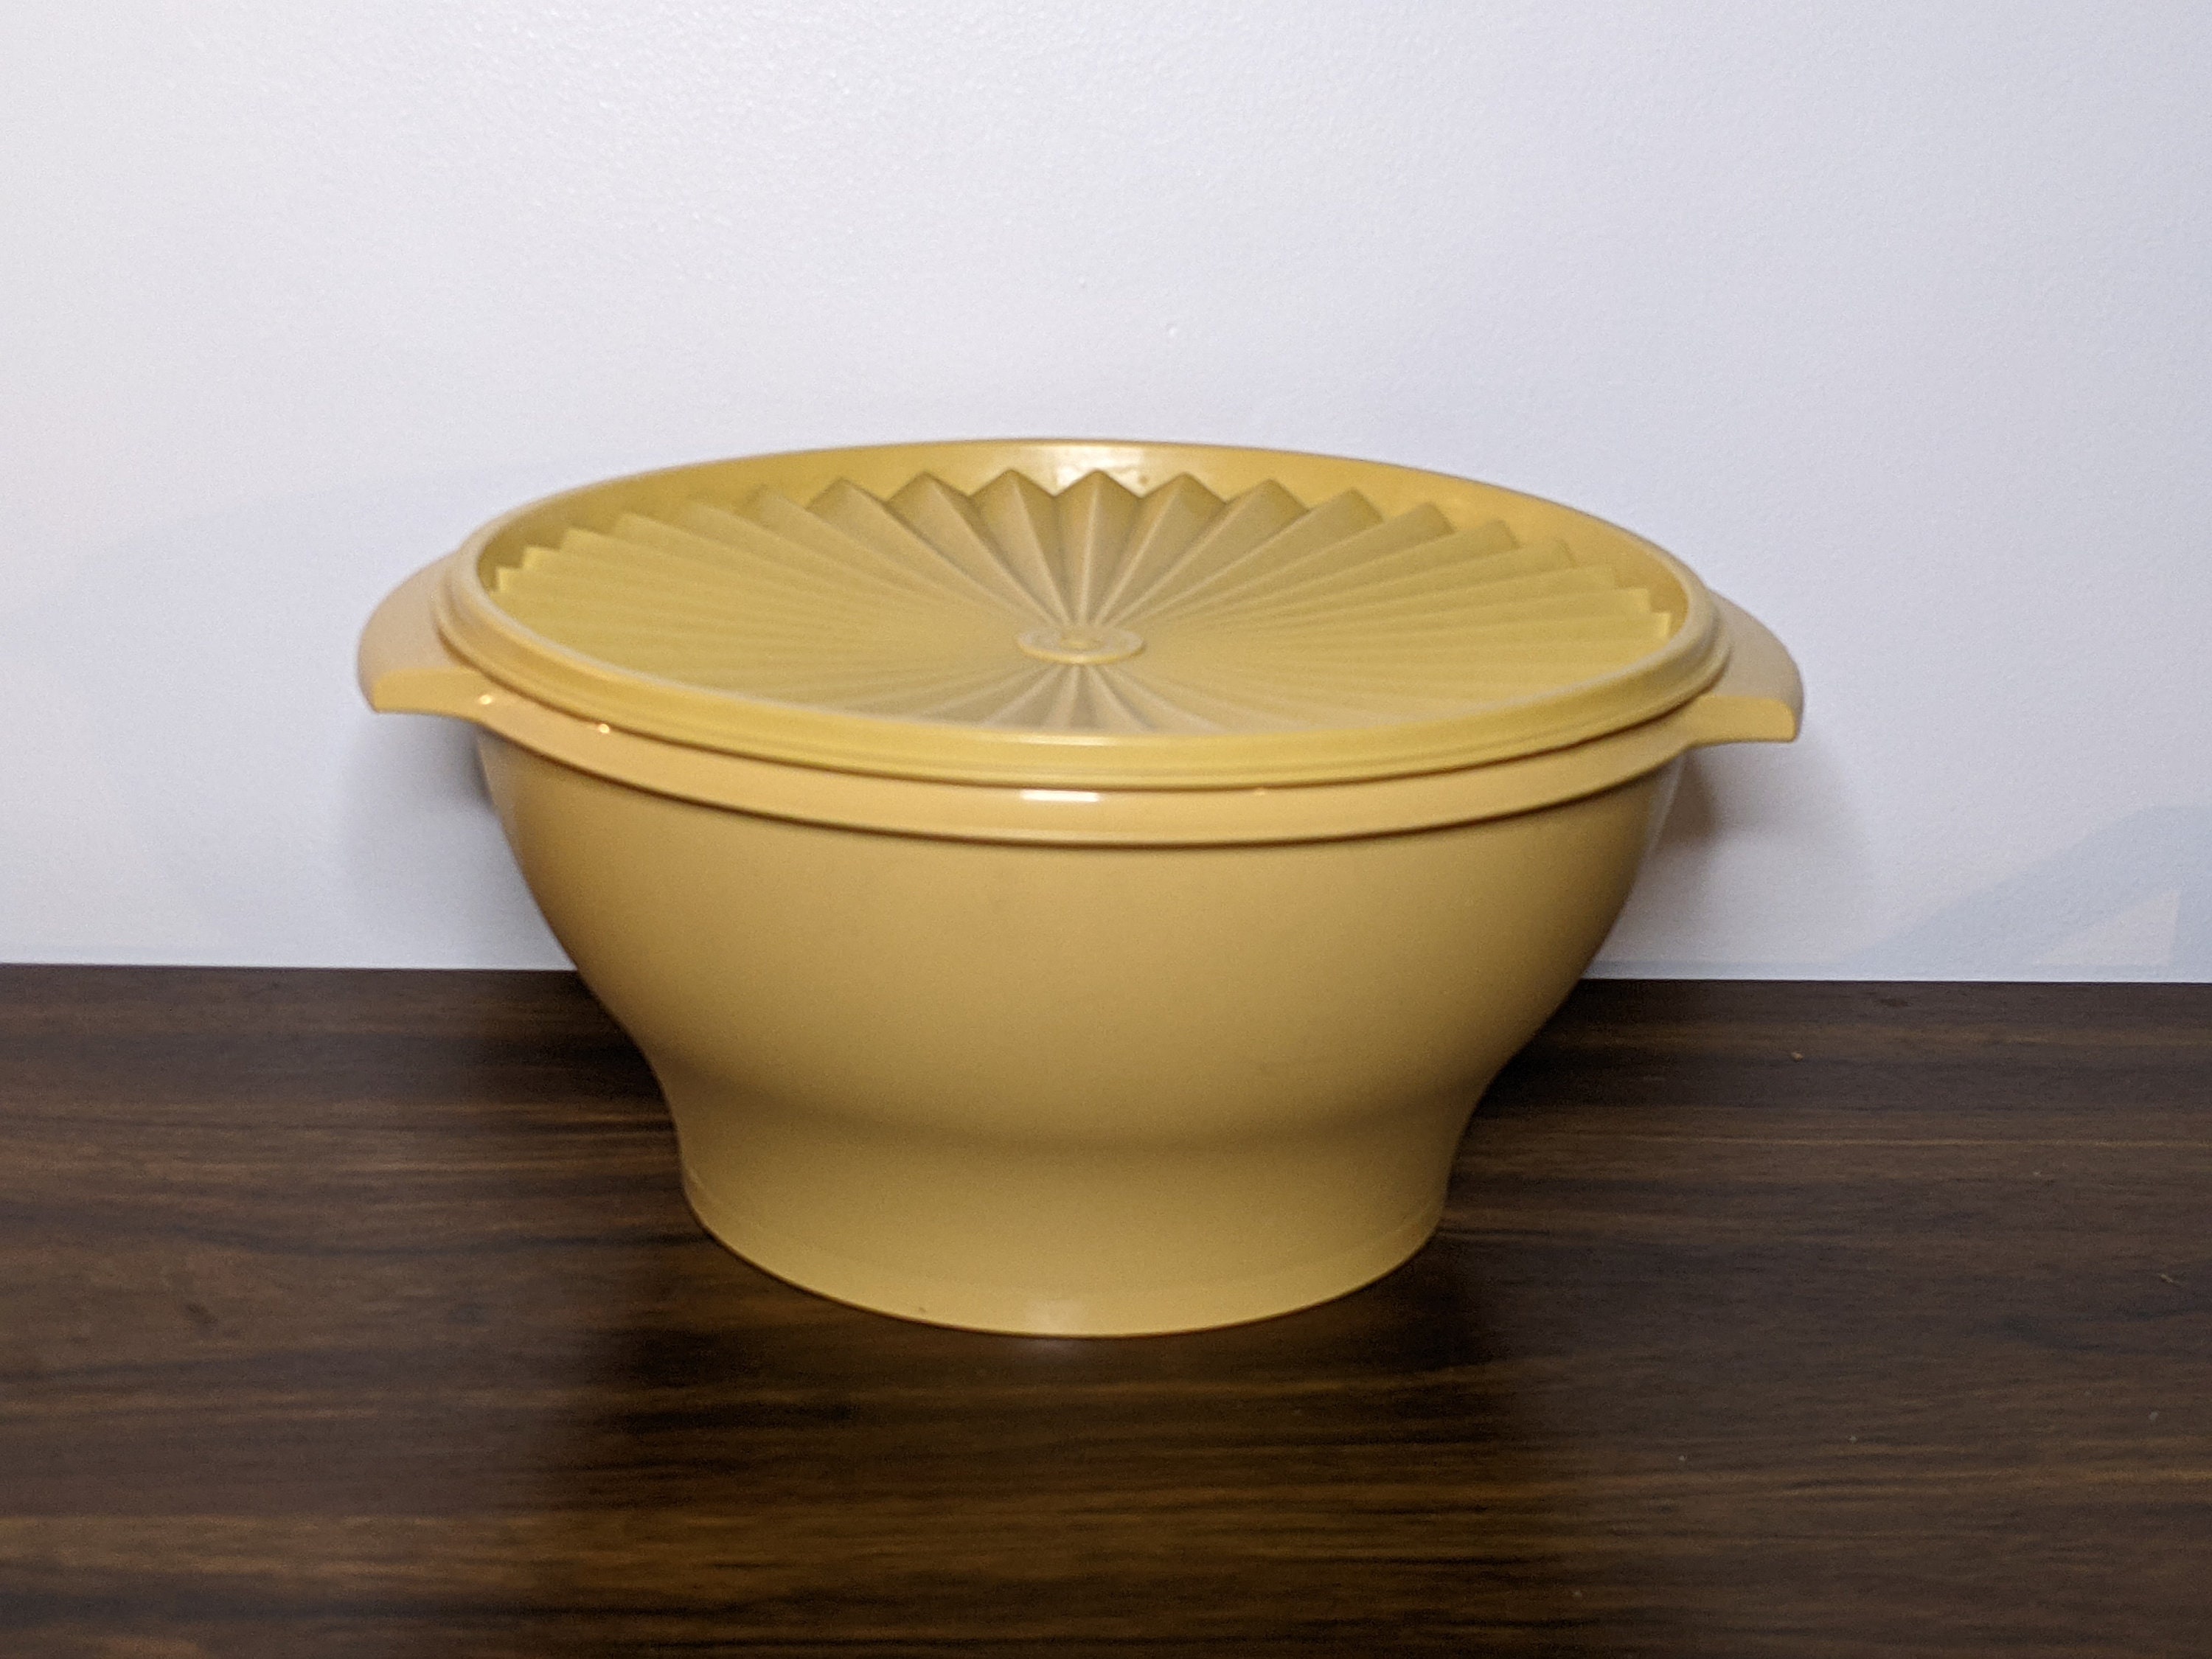 Tupperware Extra Large Bowl Salad Bowl With Lid 880-4 and Set of 5